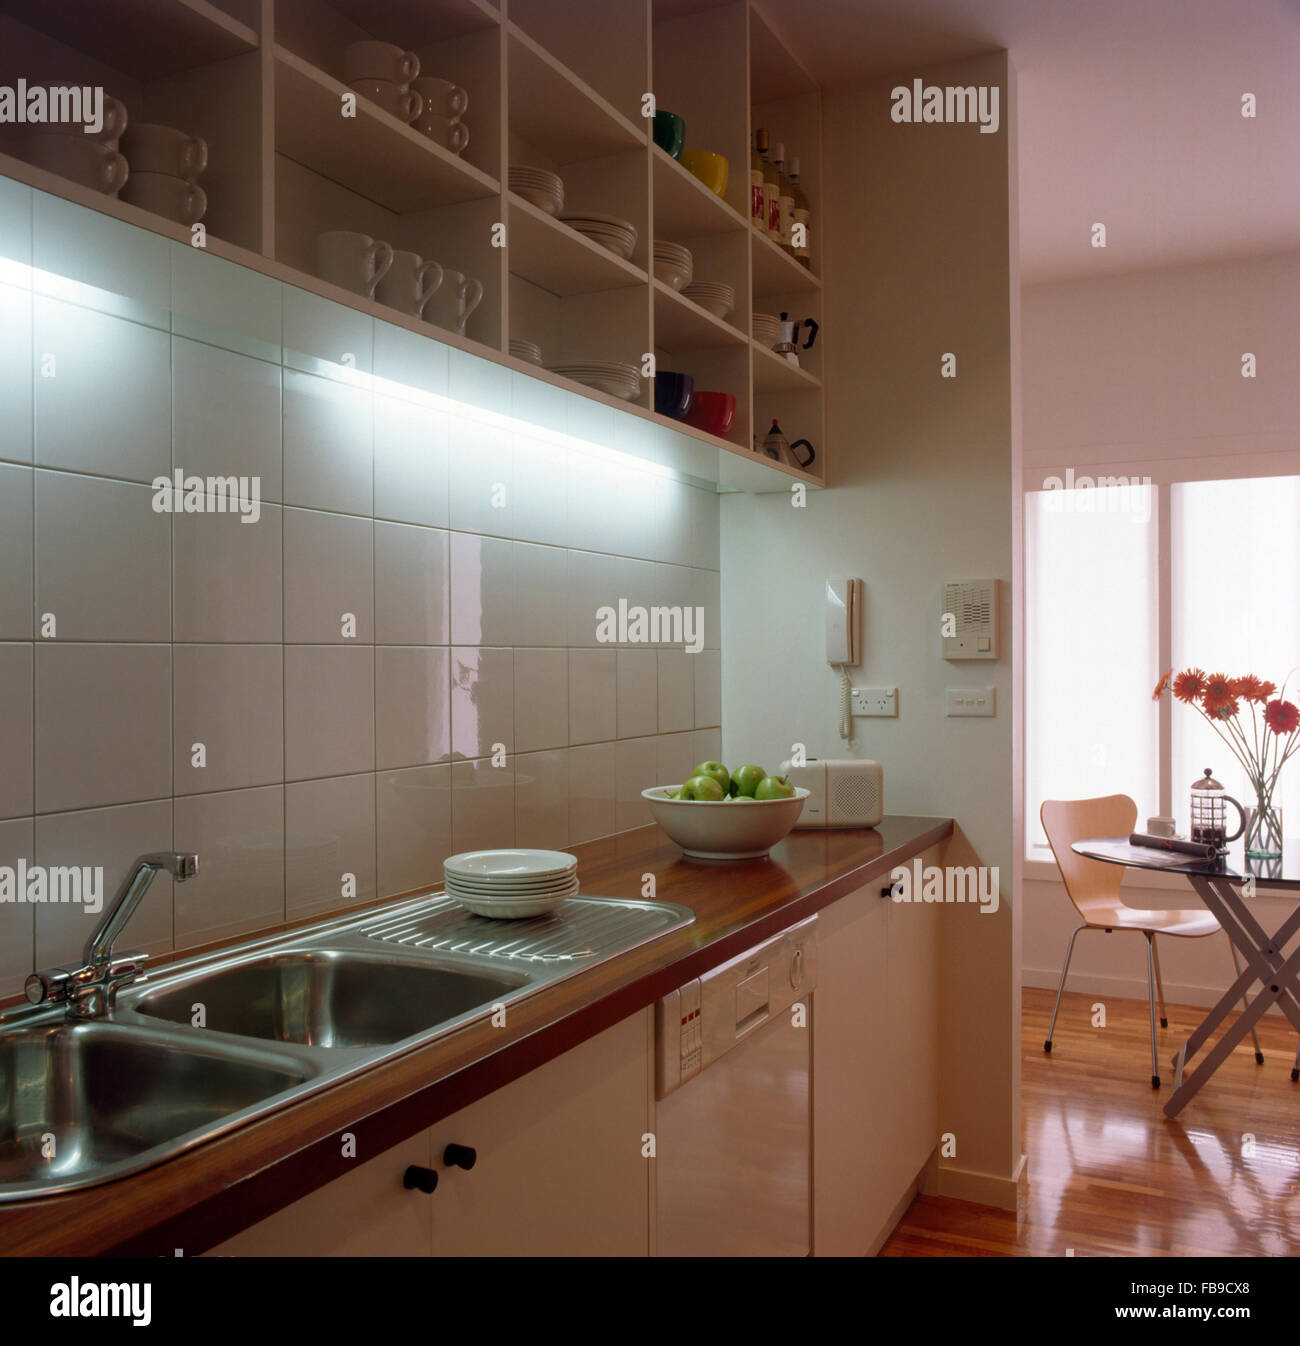 Down lighting above double stainless steel sinks in modern kitchen with open shelving Stock Photo